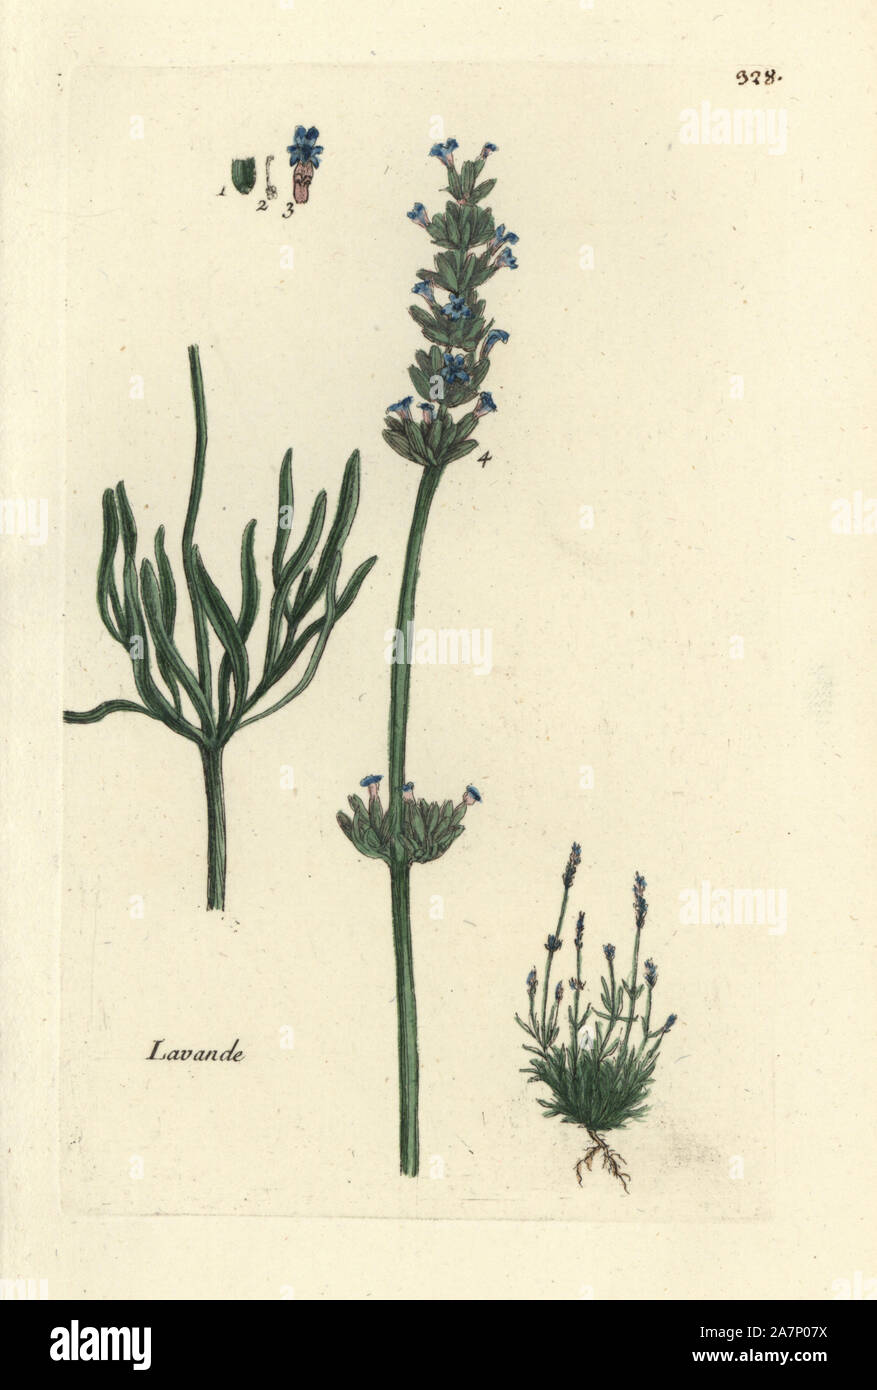 Lavender, Lavandula spica. Handcoloured botanical drawn and engraved by Pierre Bulliard from his own 'Flora Parisiensis,' 1776, Paris, P. F. Didot. Pierre Bulliard (1752-1793) was a famous French botanist who pioneered the three-colour-plate printing technique. His introduction to the flowers of Paris included 640 plants. Stock Photo